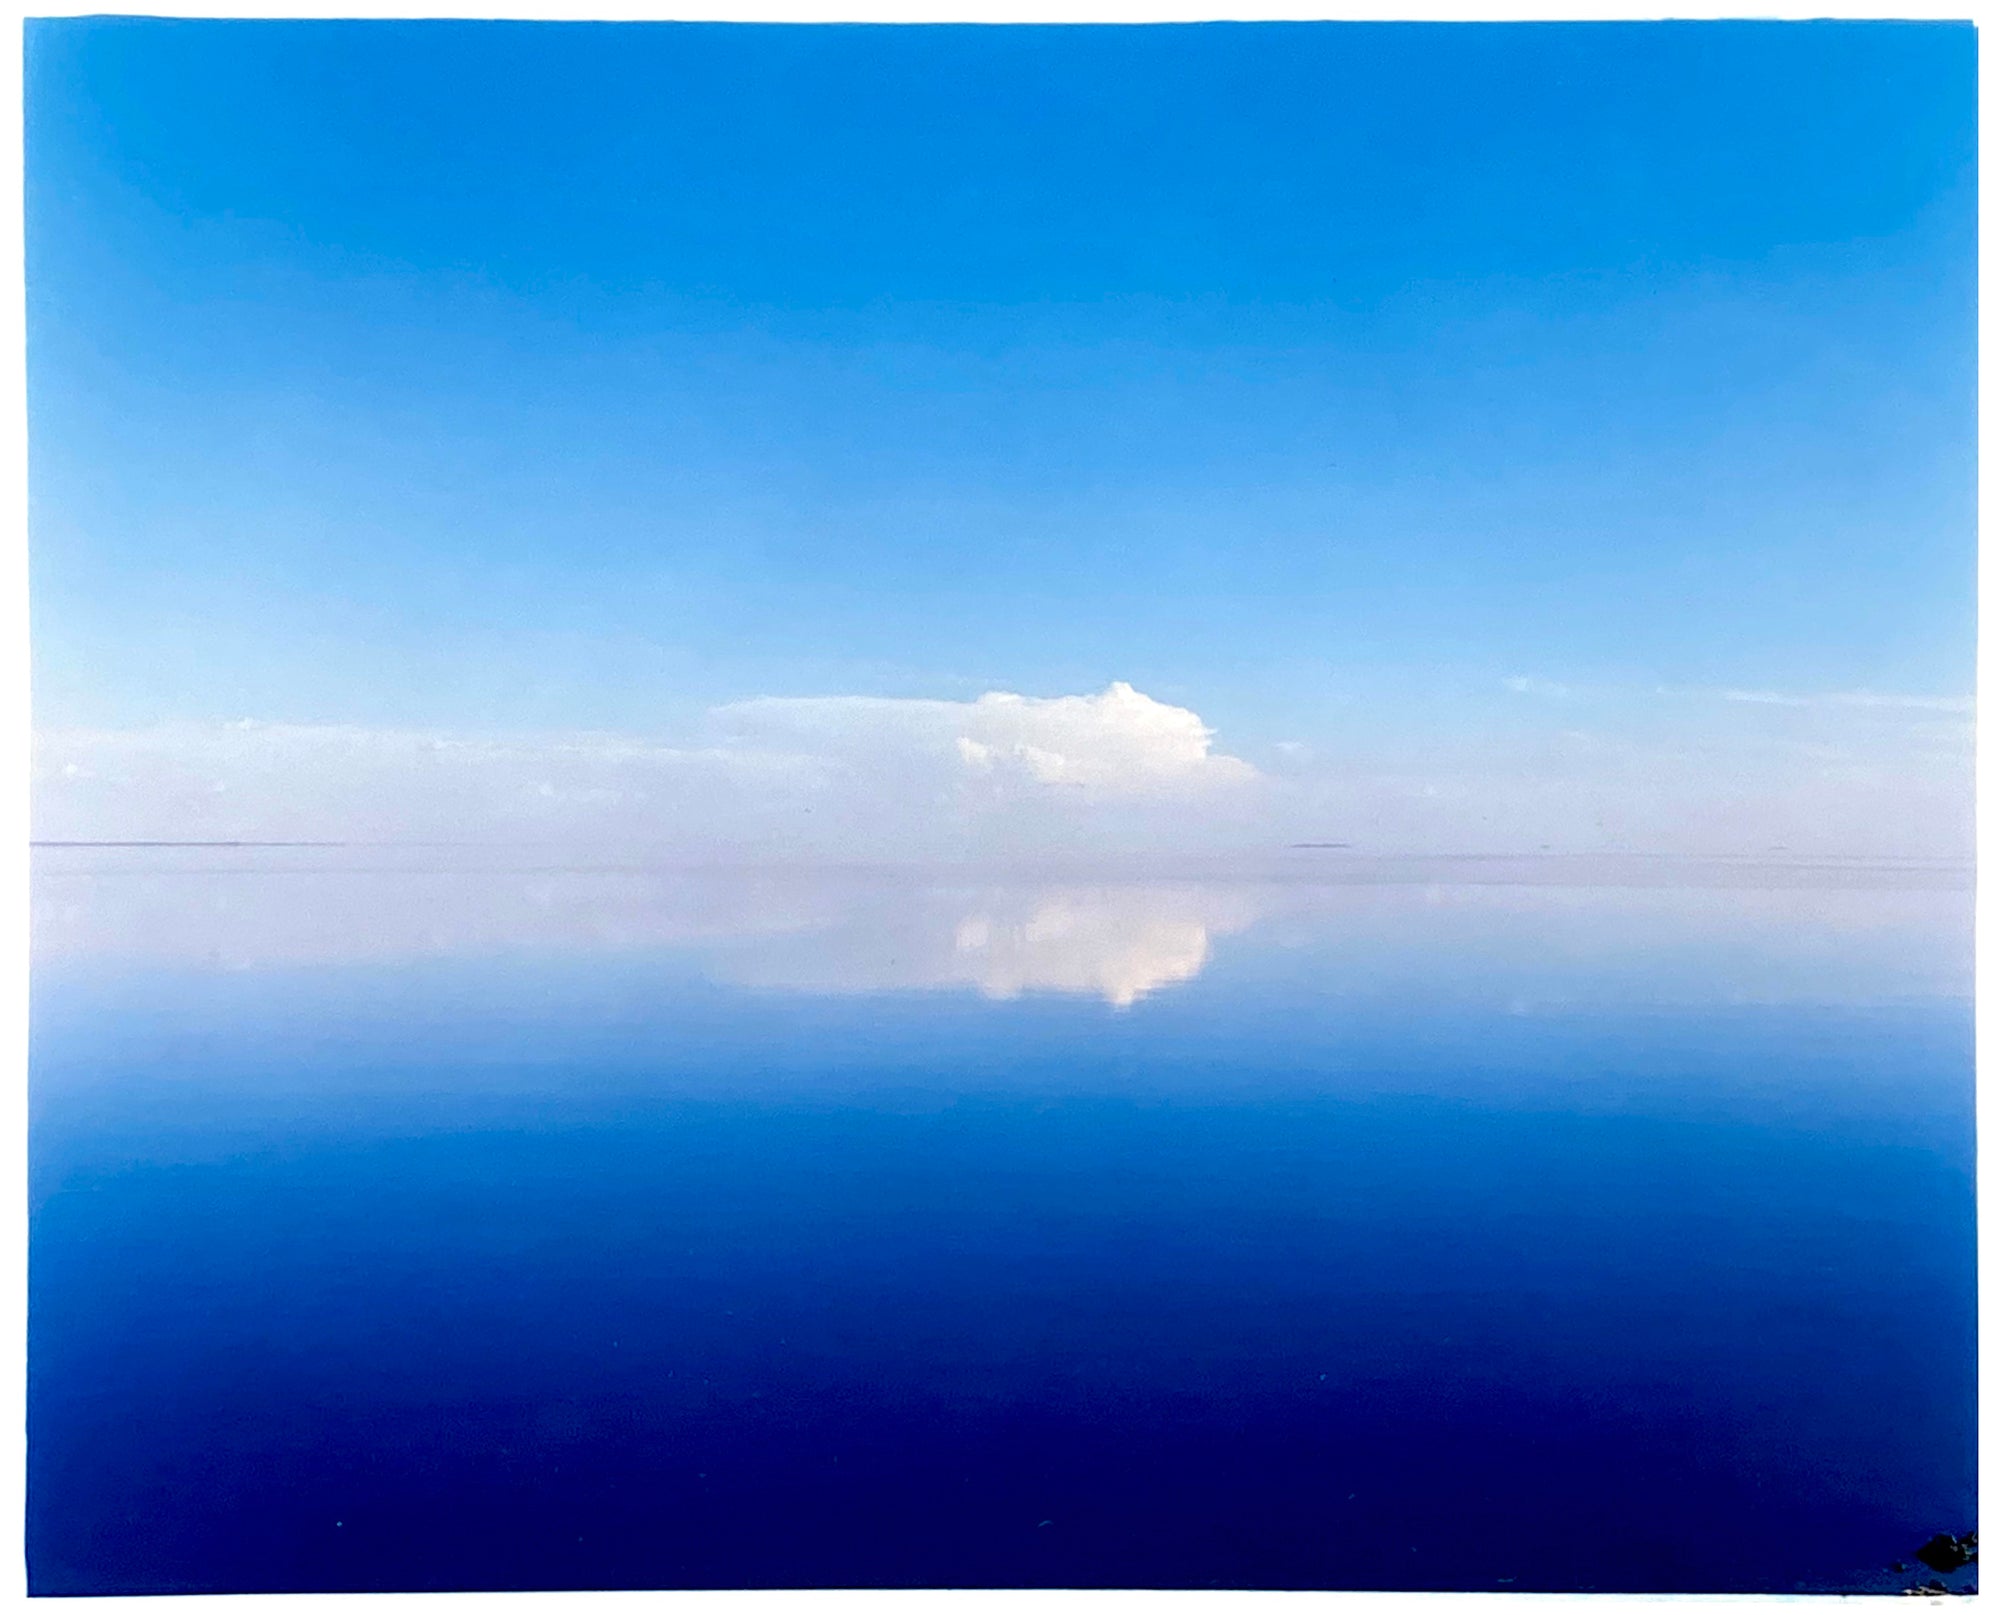 'View from Bombay Beach' looks over Salton Sea in California. Cooling shades of blue, reflection and symmetry are key to this serene waterscape. The suspended cloud which looks surreal creates a feeling of weightlessness. 